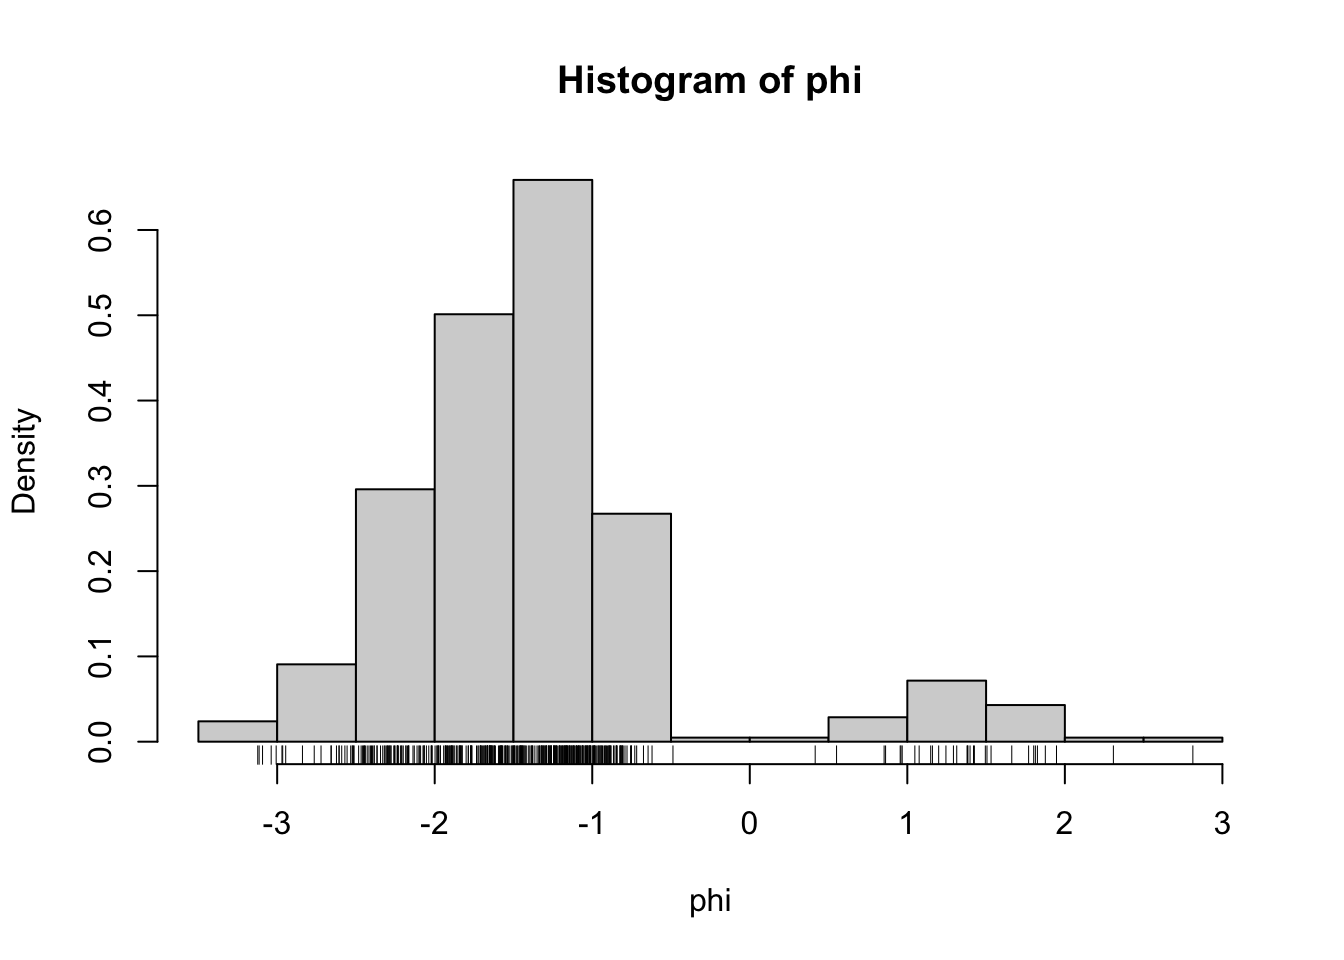 Histograms equipped with a rug plot of the distribution of \(\phi\)-angles (left) and \(\psi\)-angles (right) of the peptide planes in the protein human protein 1HMP.